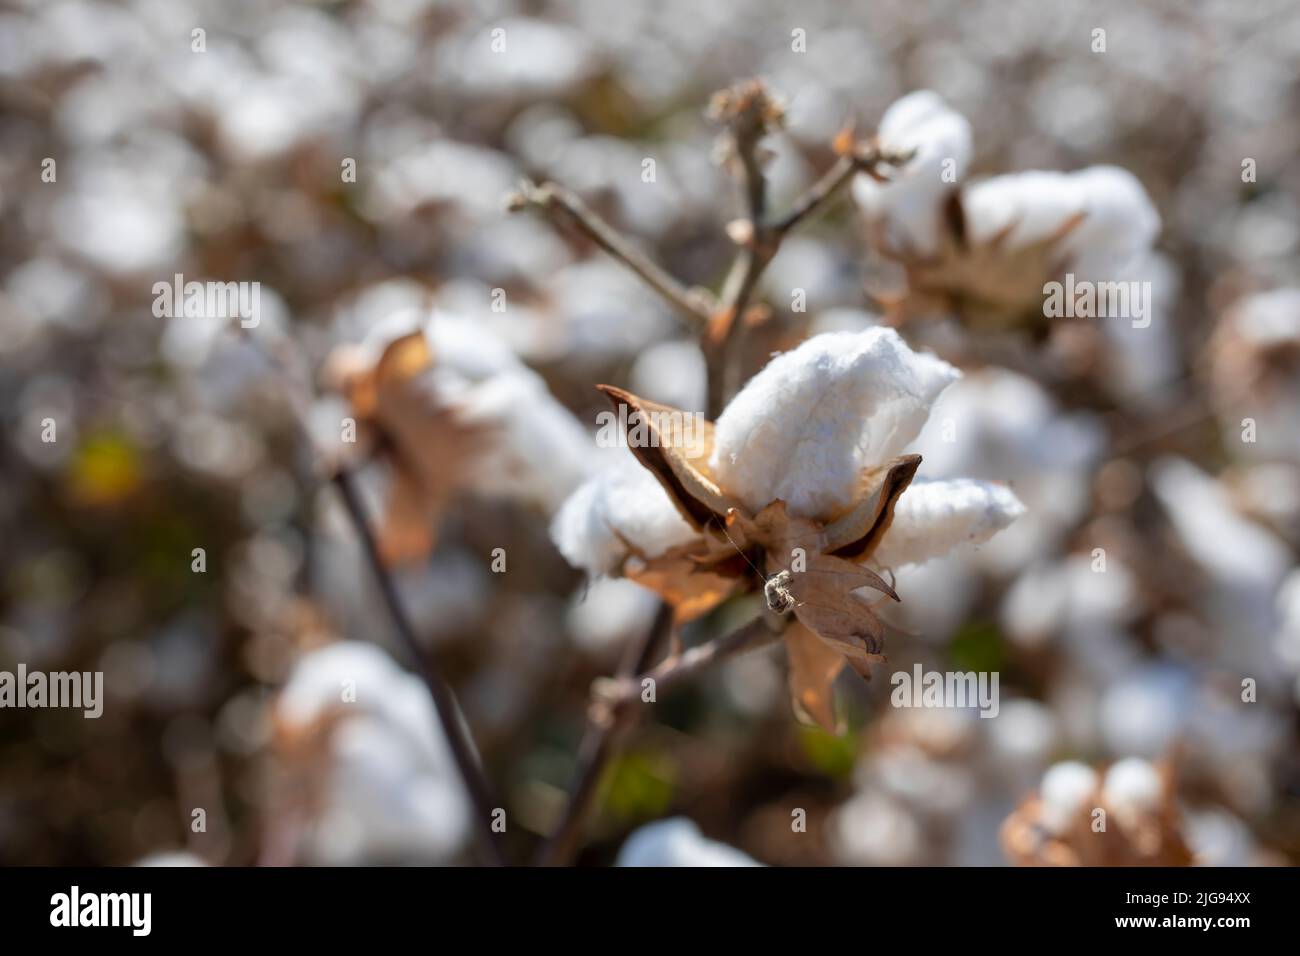 Cotton fields ready for harvesting Stock Photo